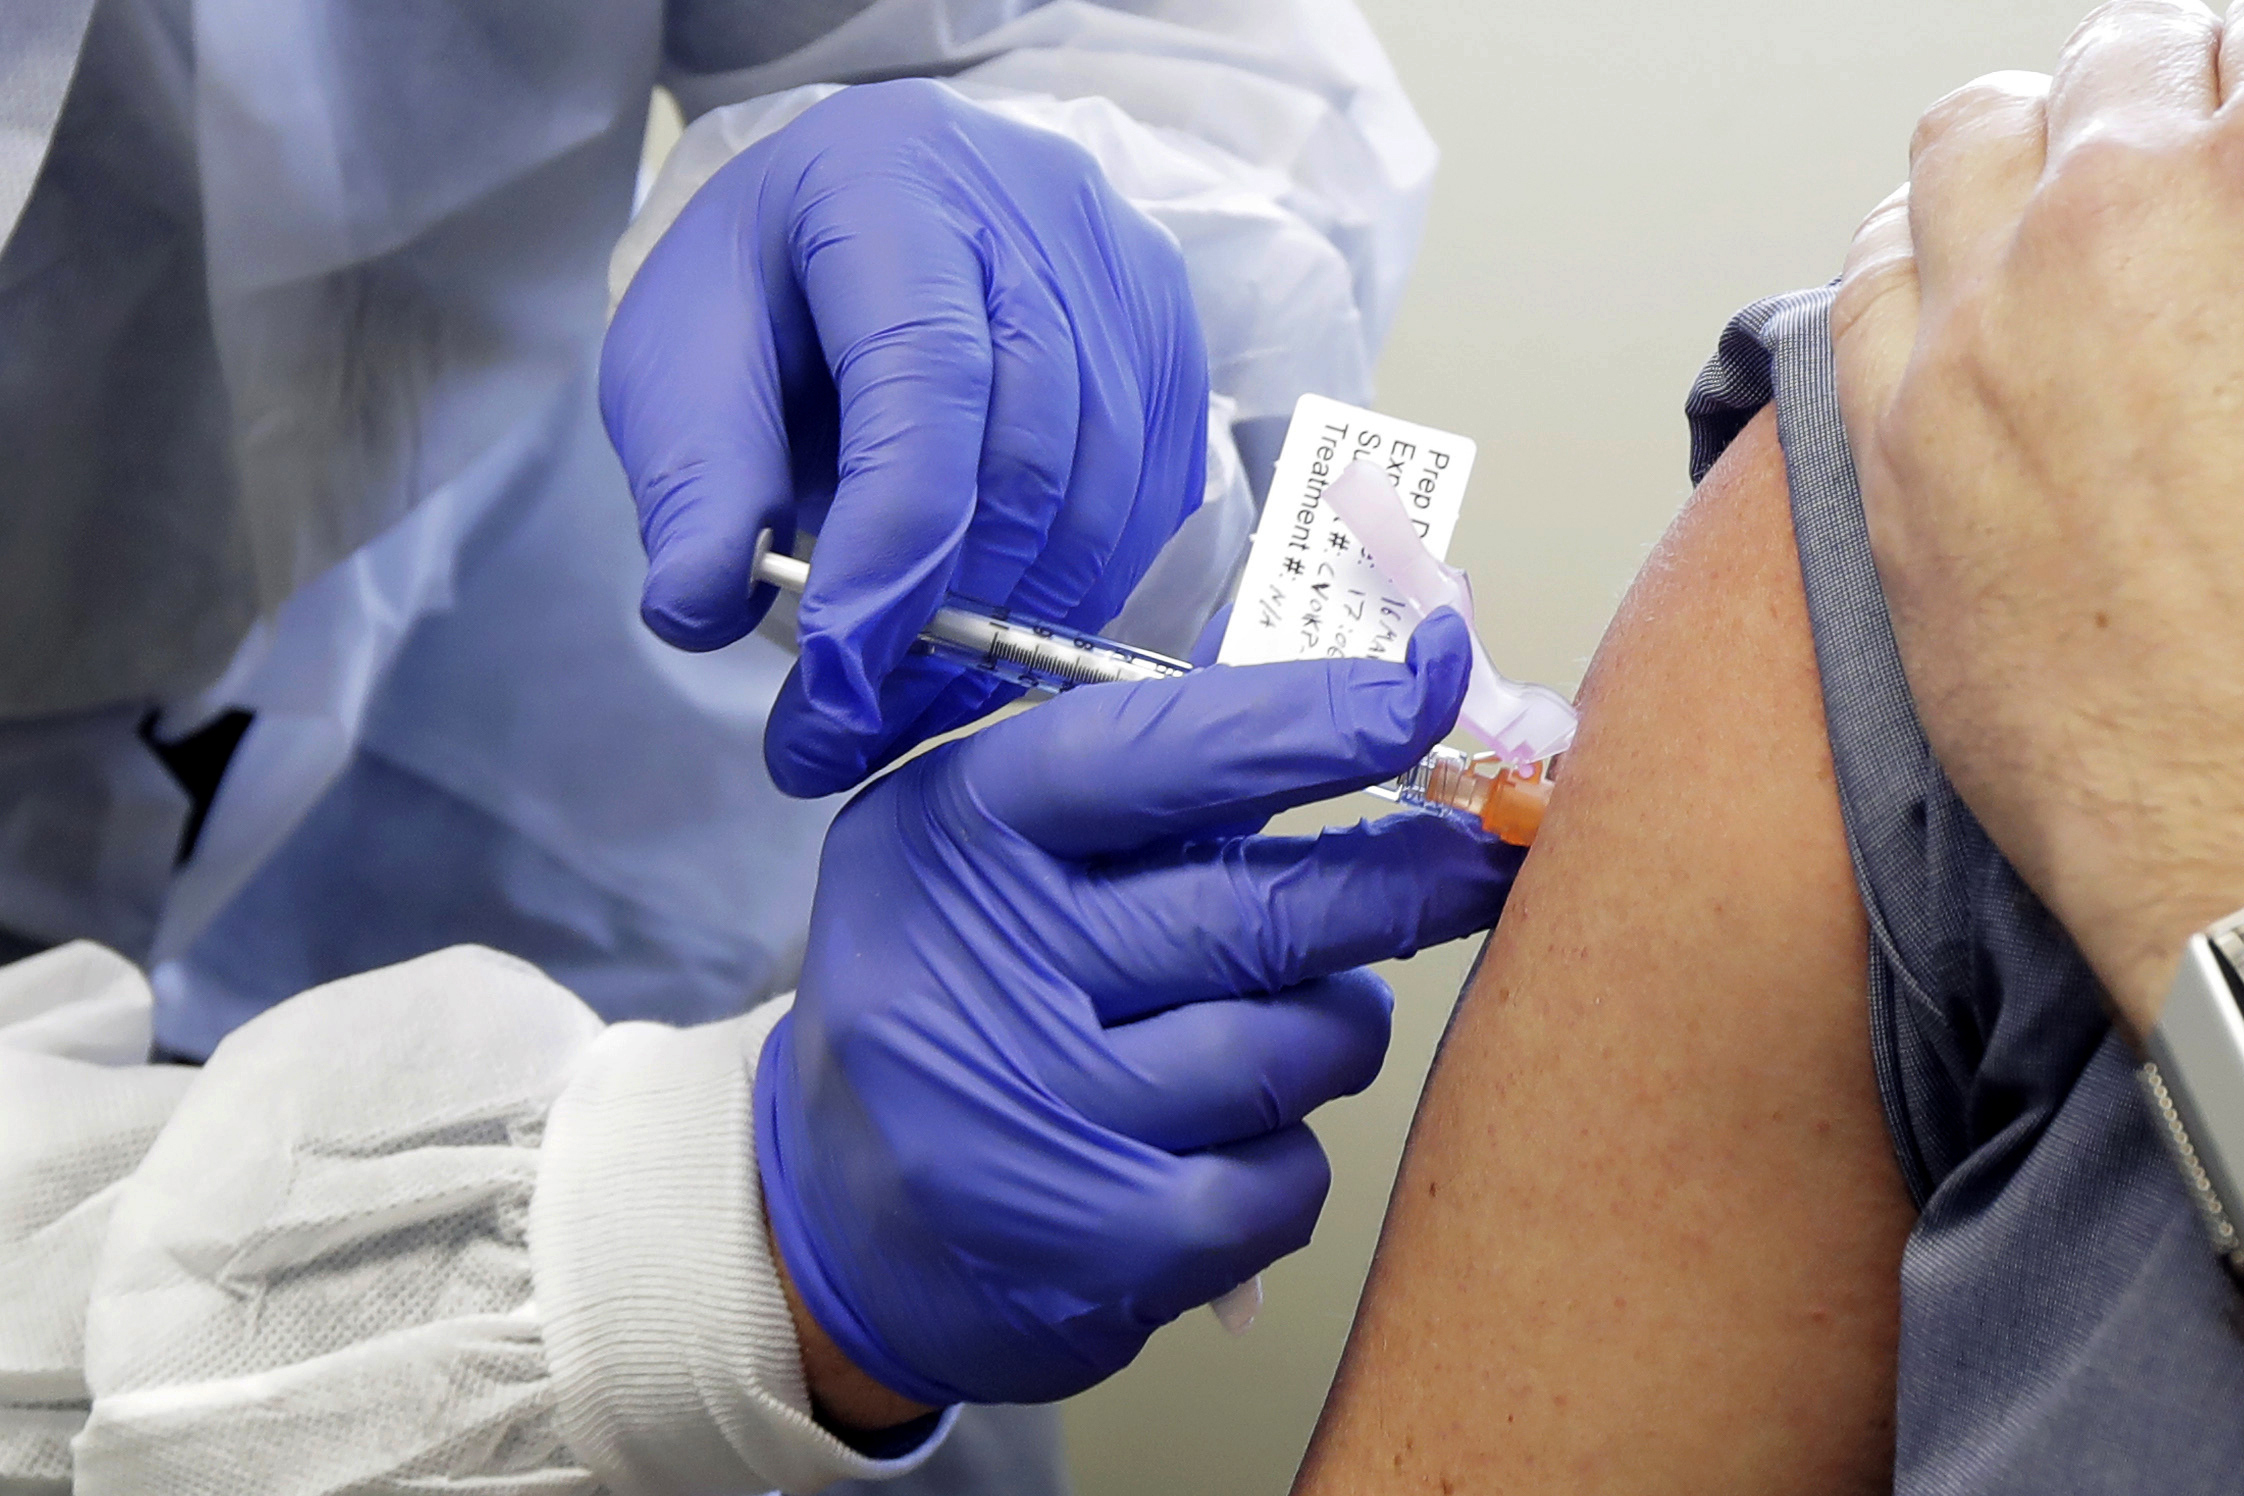 PHOTO: A patient receives a shot in the first-stage study of a potential vaccine for COVID-19, the disease caused by the new coronavirus, at the Kaiser Permanente Washington Health Research Institute in Seattle, March 16, 2020.